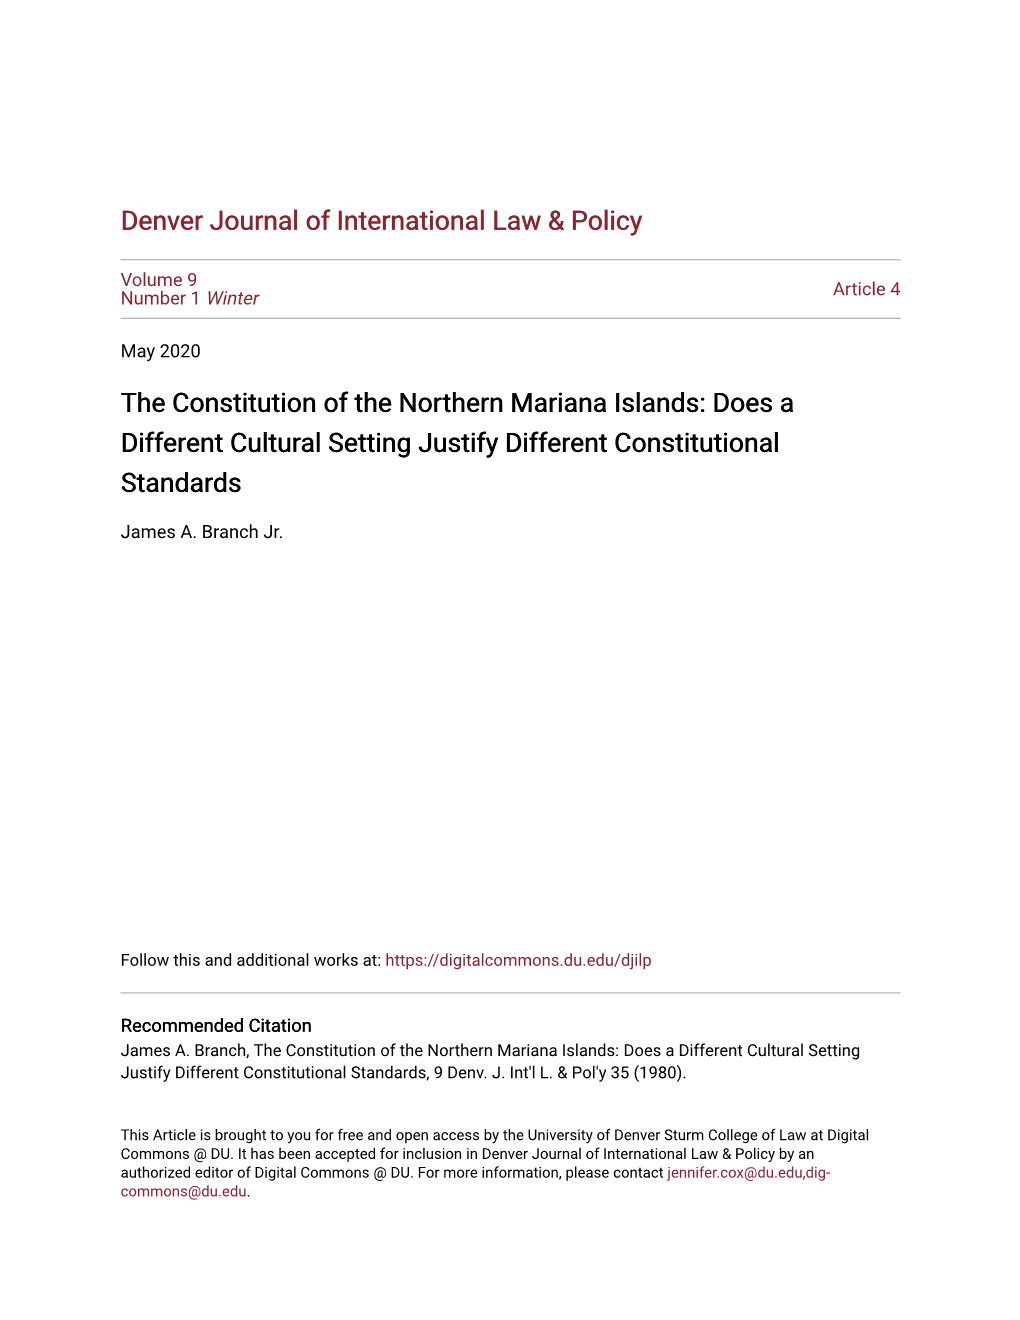 The Constitution of the Northern Mariana Islands: Does a Different Cultural Setting Justify Different Constitutional Standards